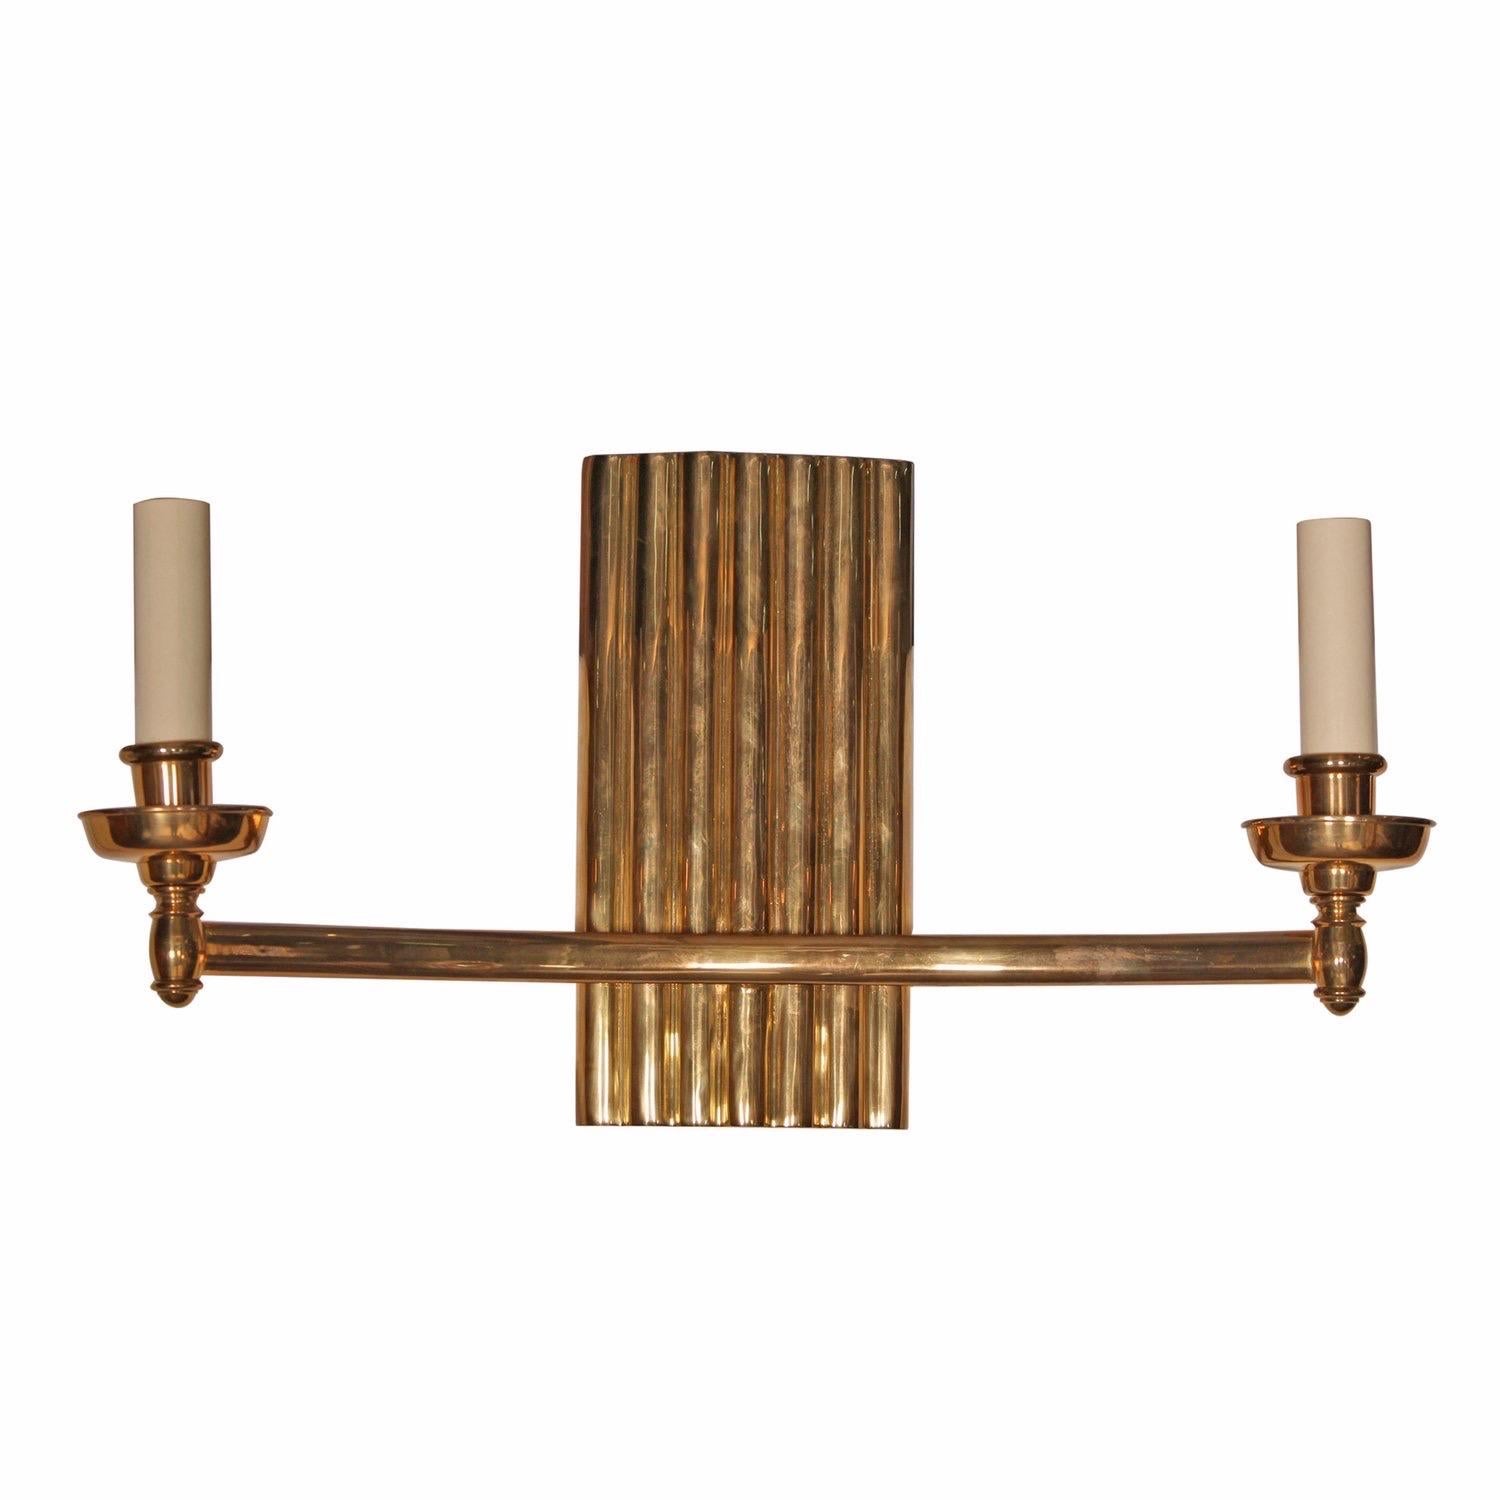 Pair of antique bronze sconces with double arms and ribbed back; highlighted by a high polished goldtone finish.

Dimensions (each) 23”W x 6.5”D x 12.2”H
